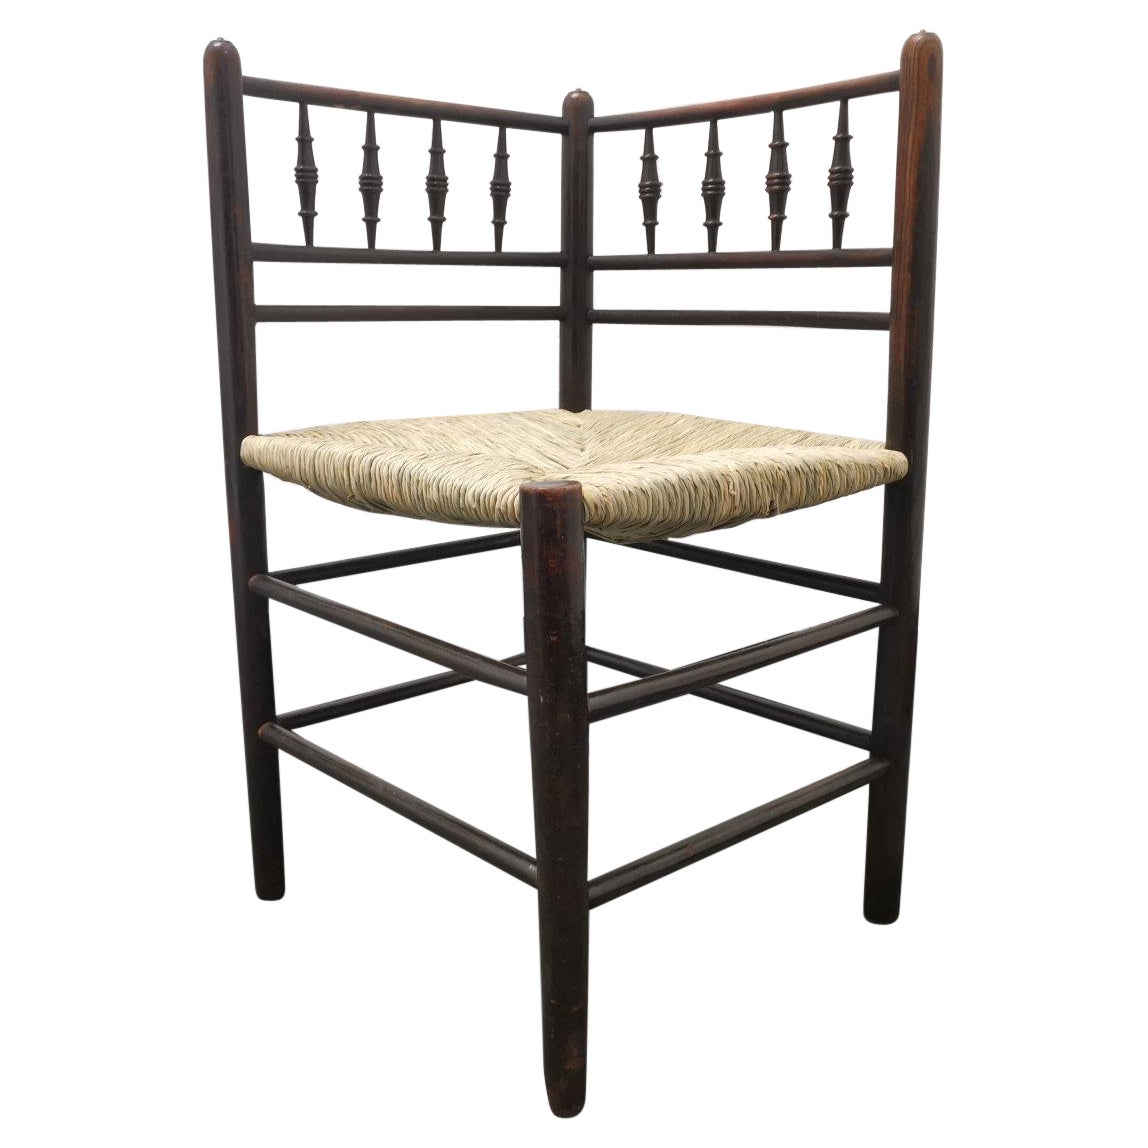 Morris & Co, Attributed to Phillip Webb, A Rare Sussex Rush Seat Corner Chair